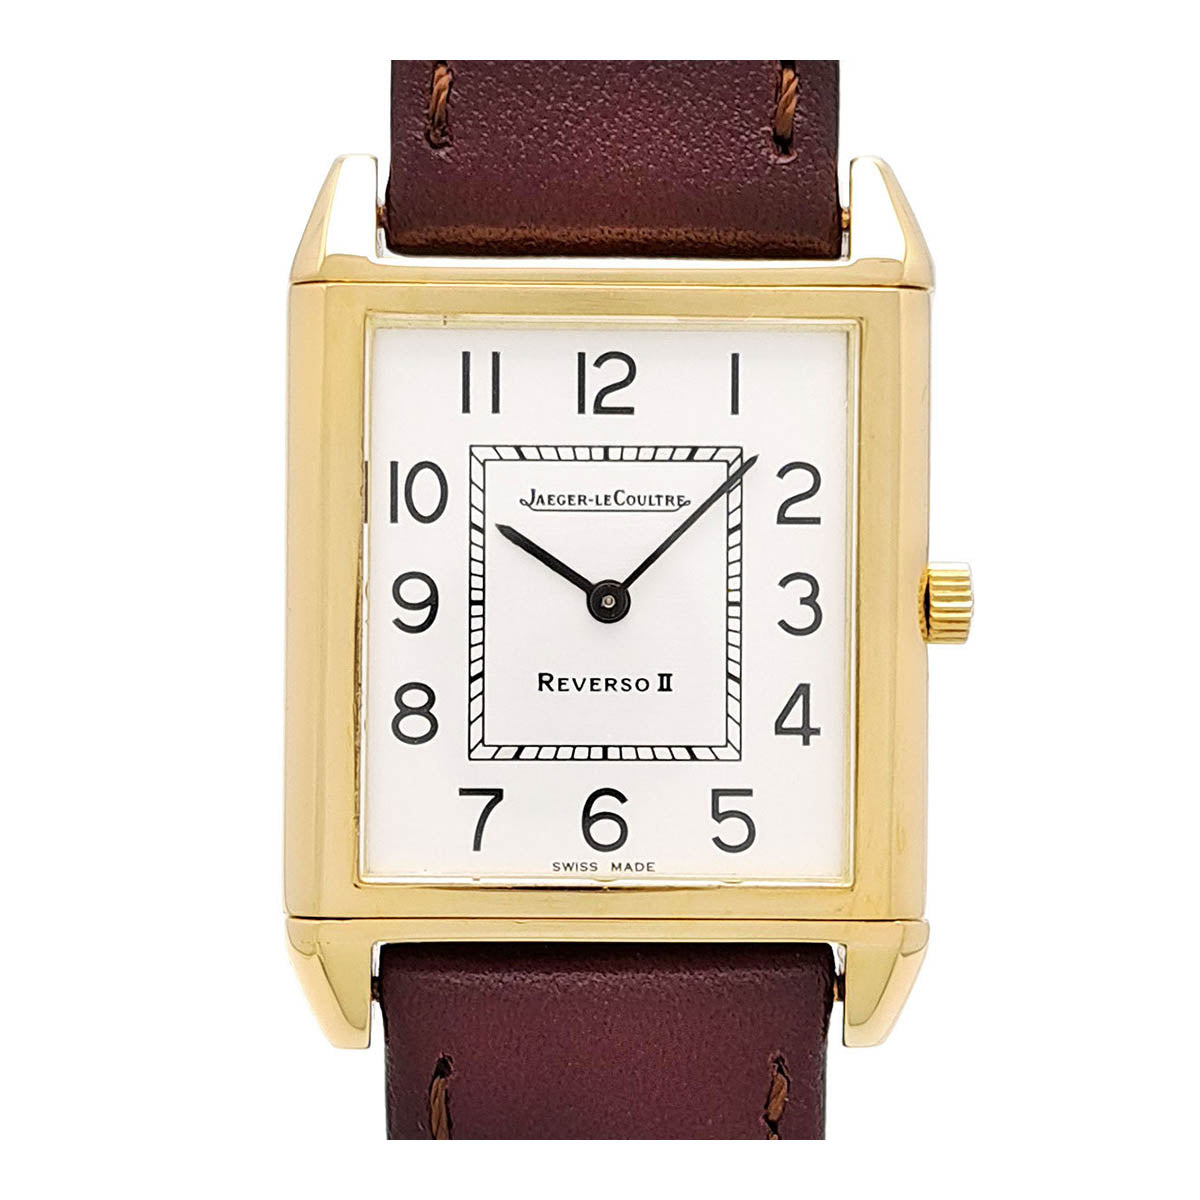 Antique Jaeger-LeCoultre Reverso II Watch Overhauled by JL 1410031 Hand-Wound Yellow Gold Men's Timepiece 1410031.0